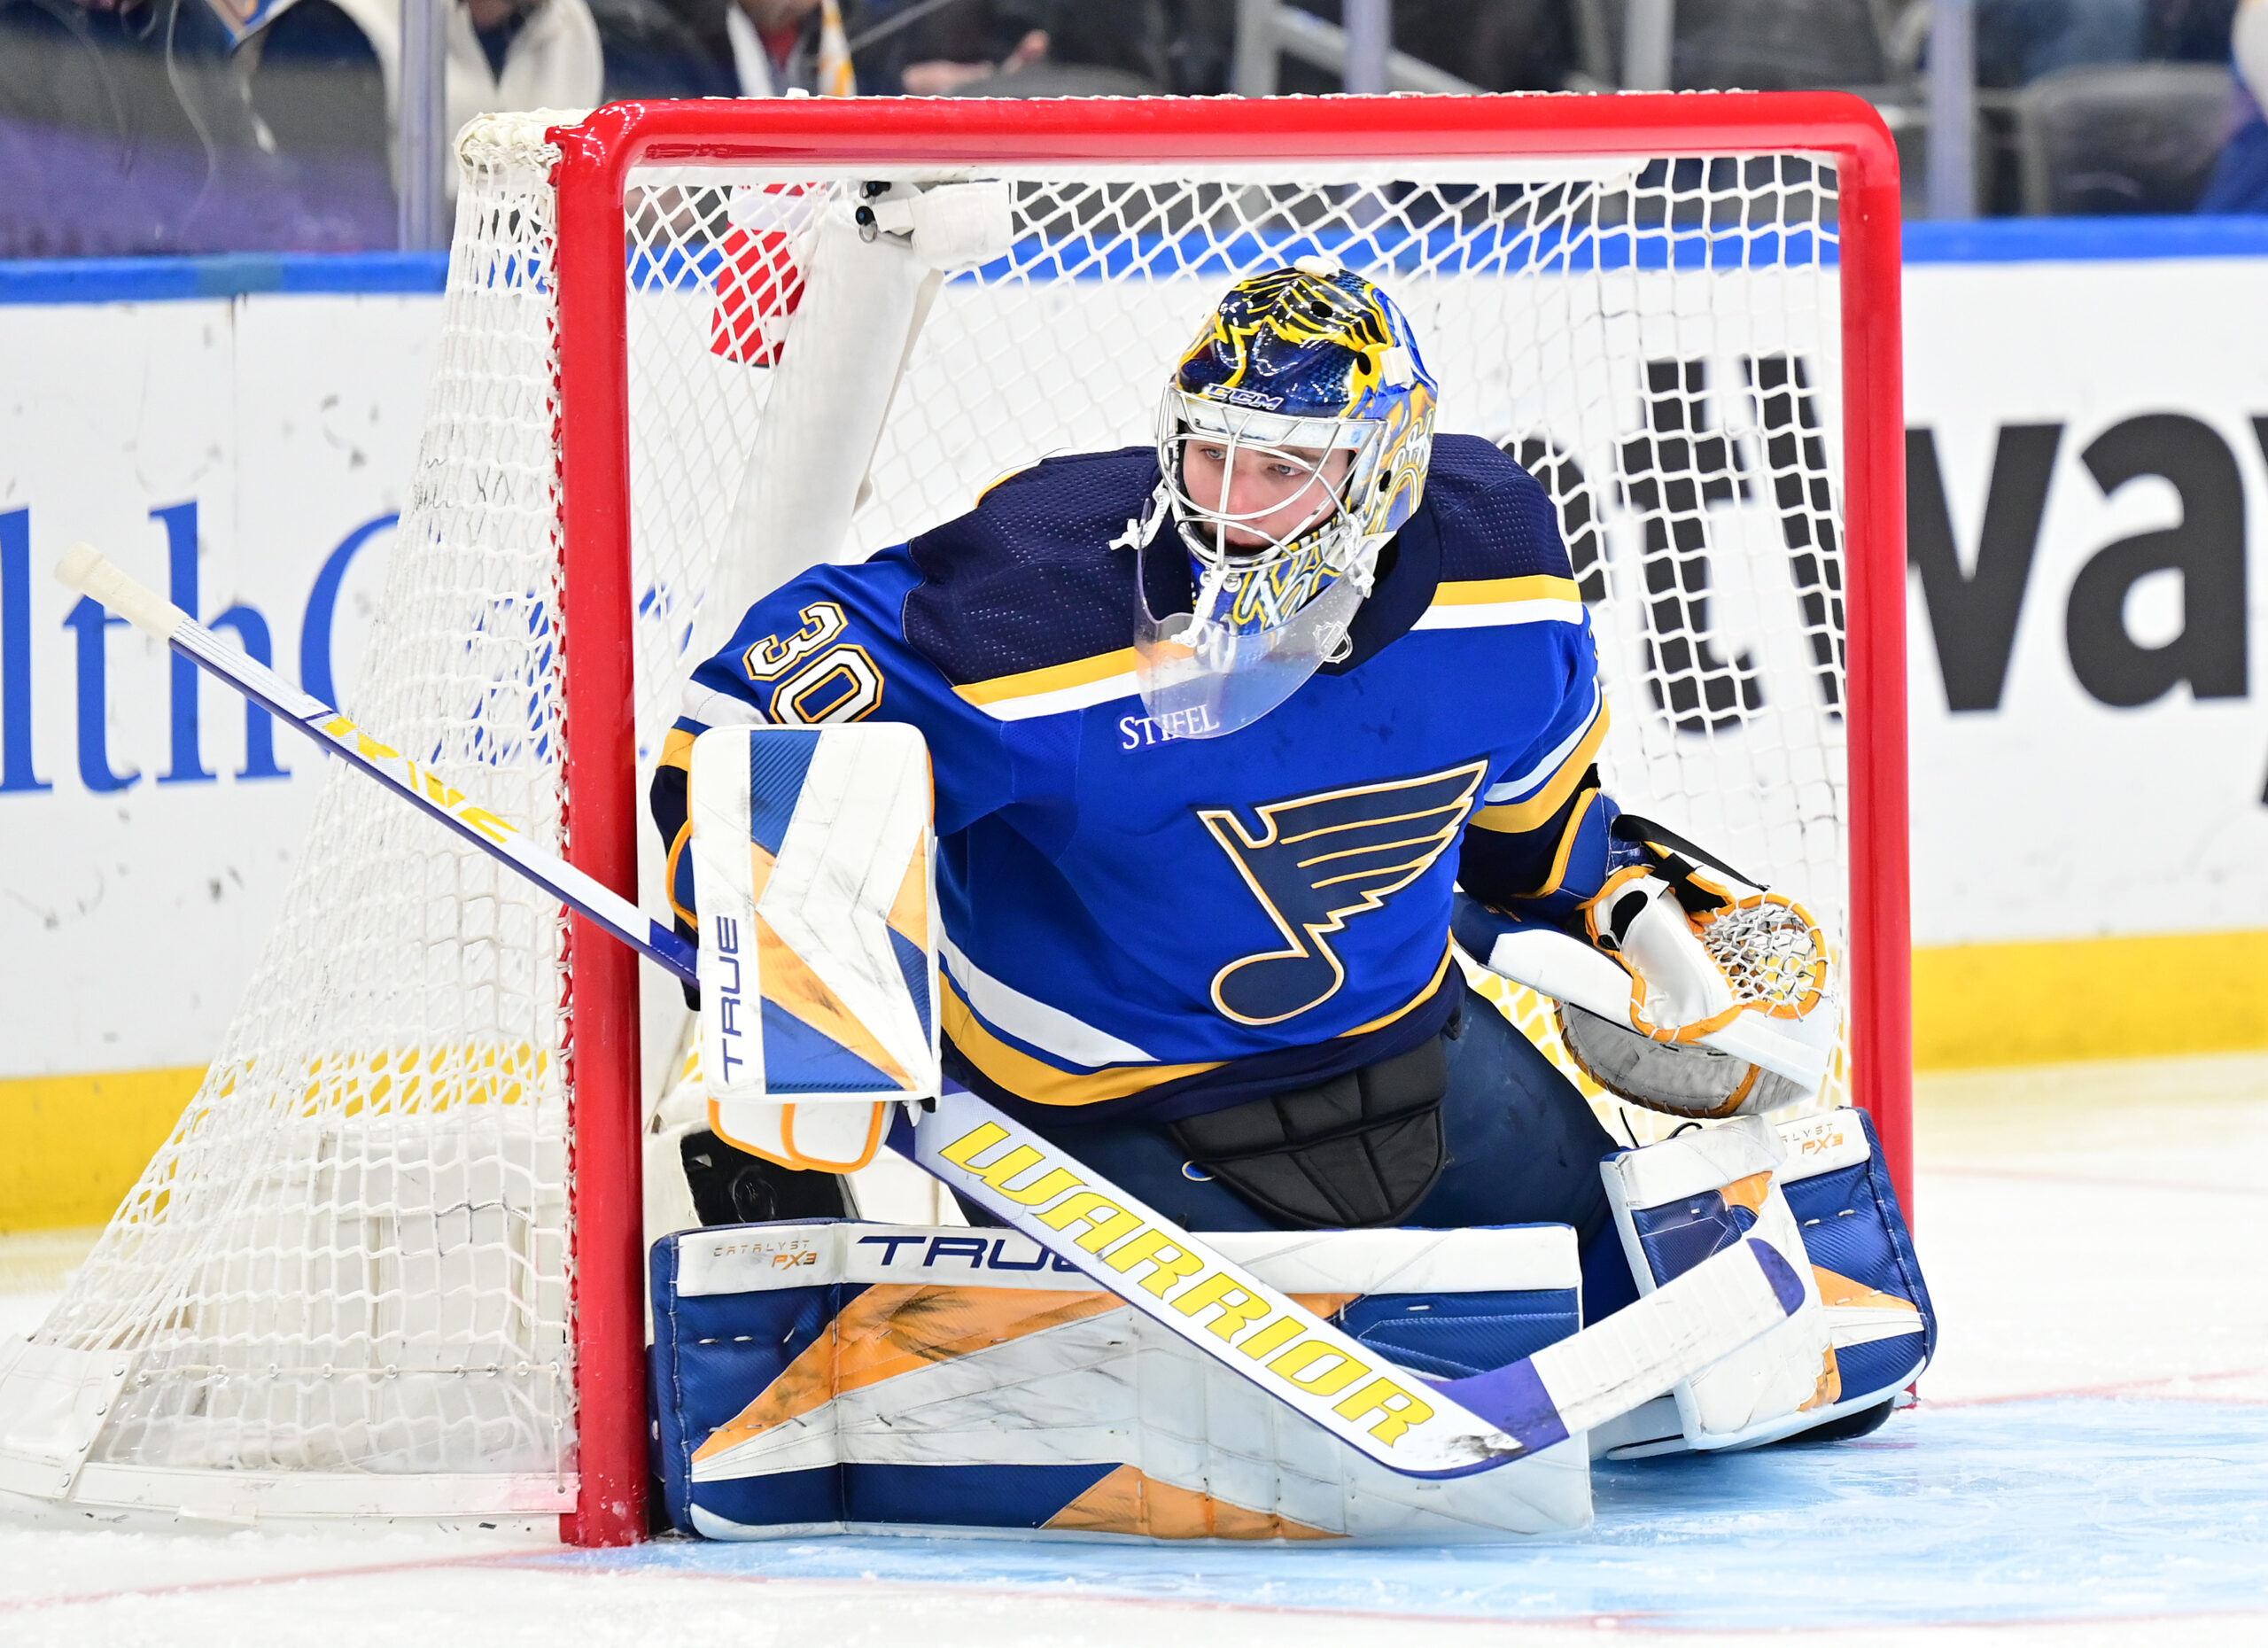 The St. Louis Blues have a talented group of goaltending prospects